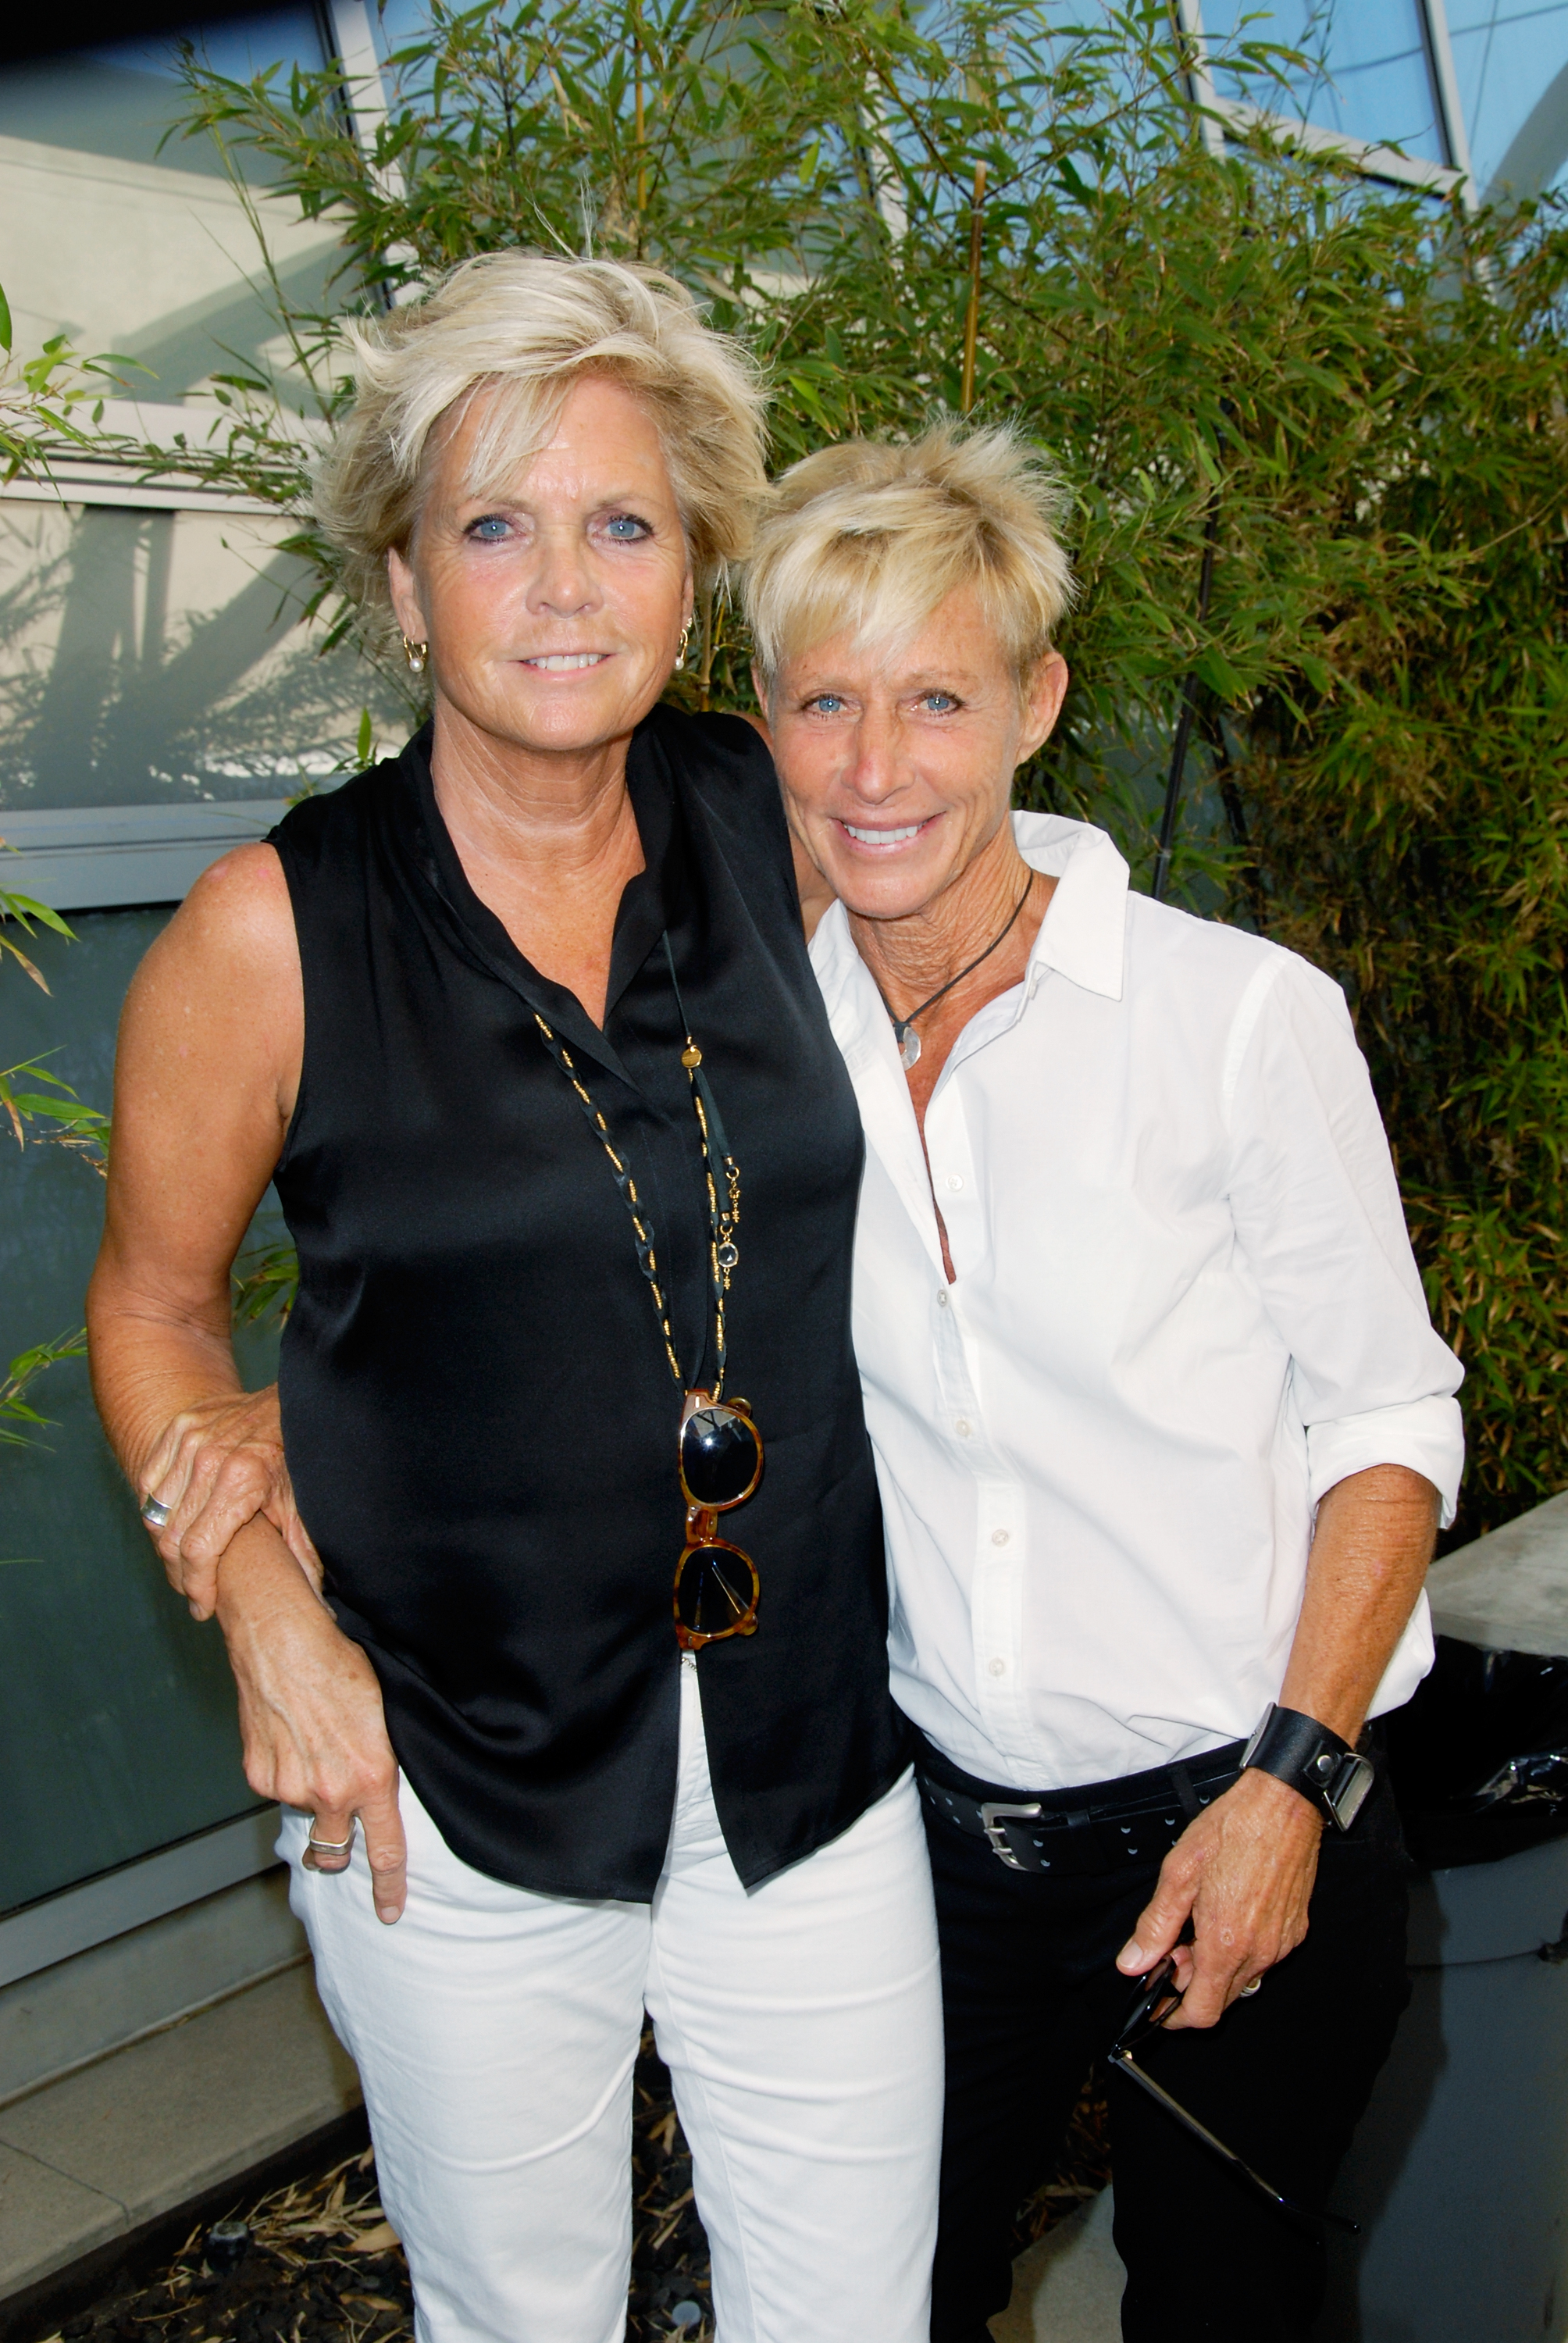 Actress Meredith Baxter and her partner actress Nancy Locke attend "Outfest VIP Women's Soiree" at Gallery Lofts on June 24, 2012 in Los Angeles, California. | Source: Getty Images